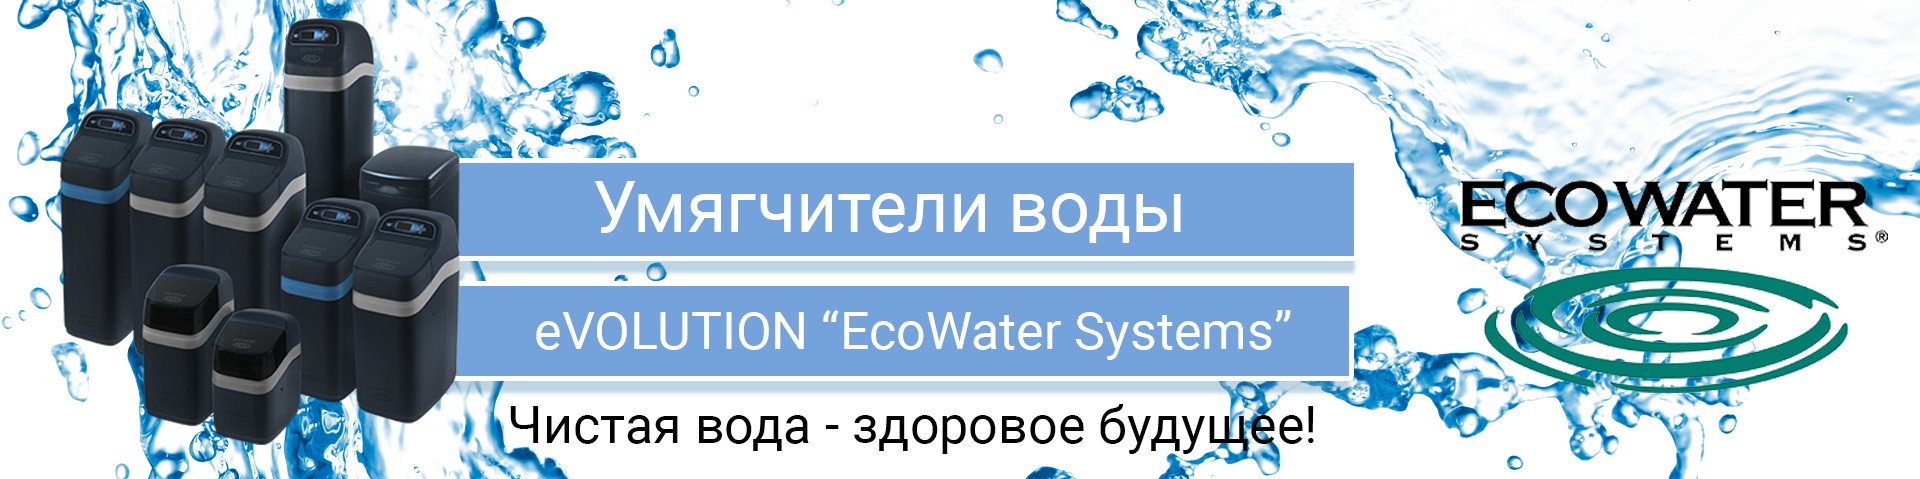 ECOWATER